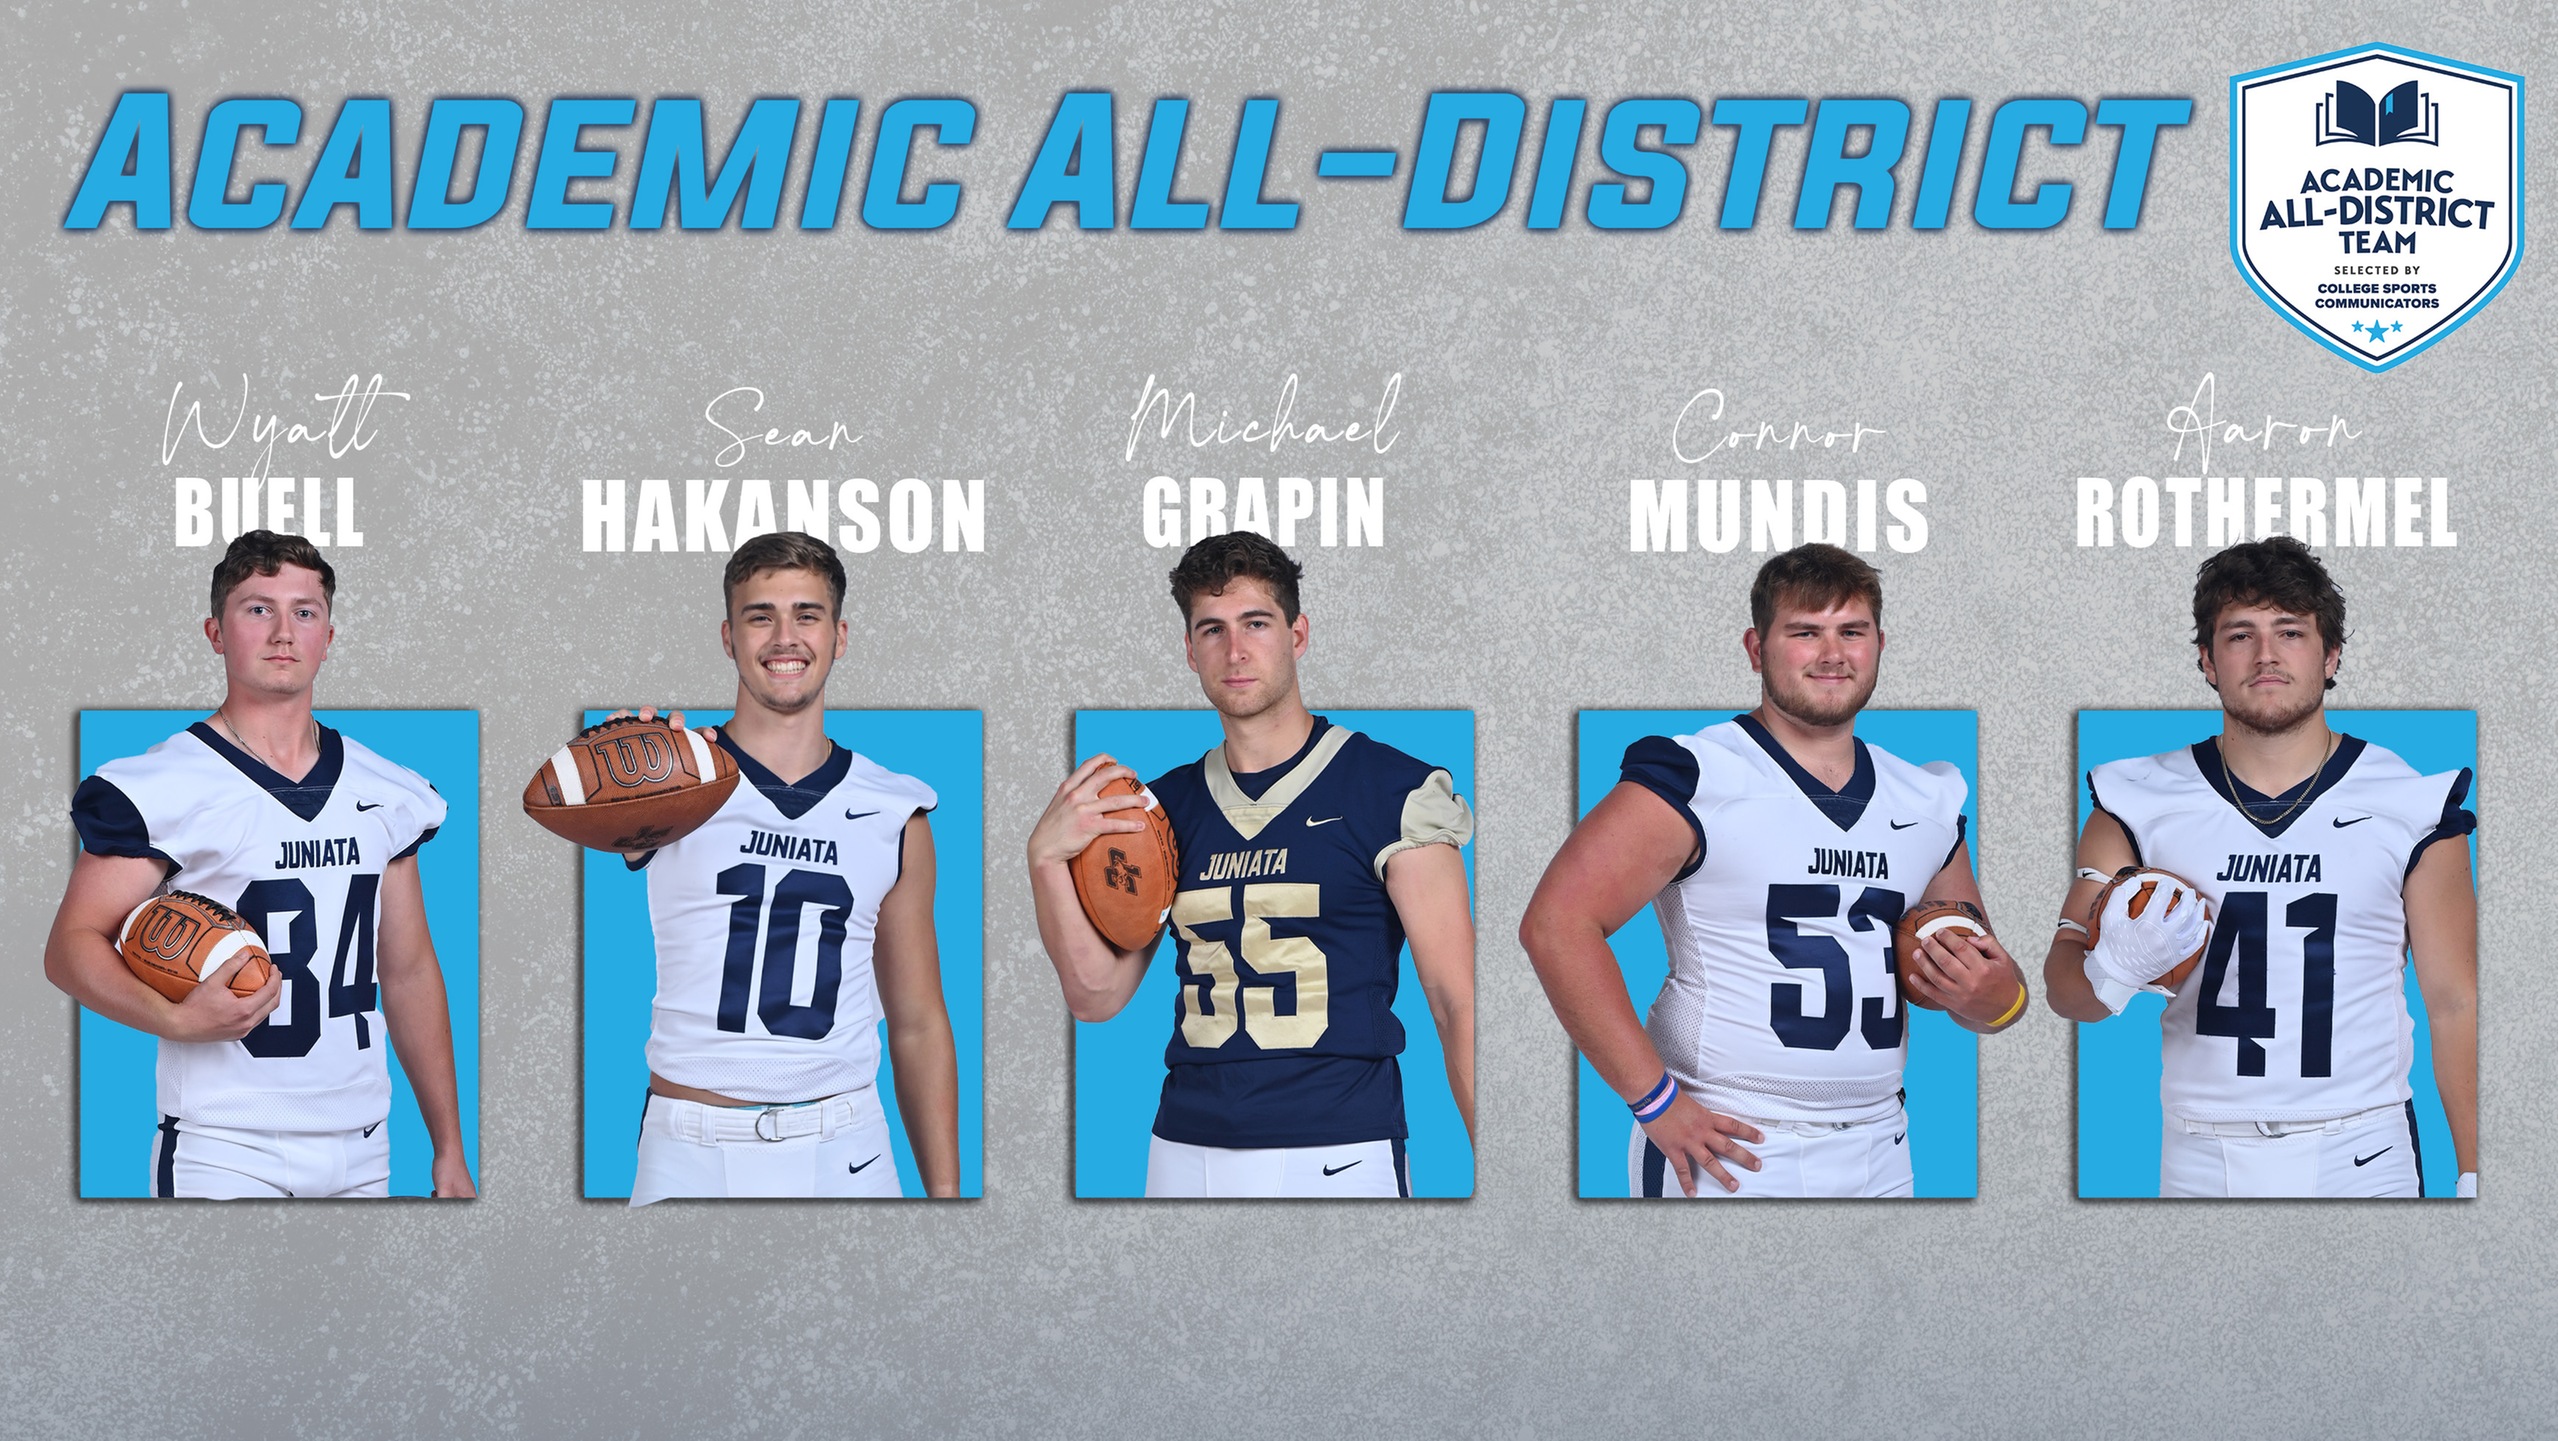 Five Eagles Named to College Sports Communicators Academic All-District® Football Team